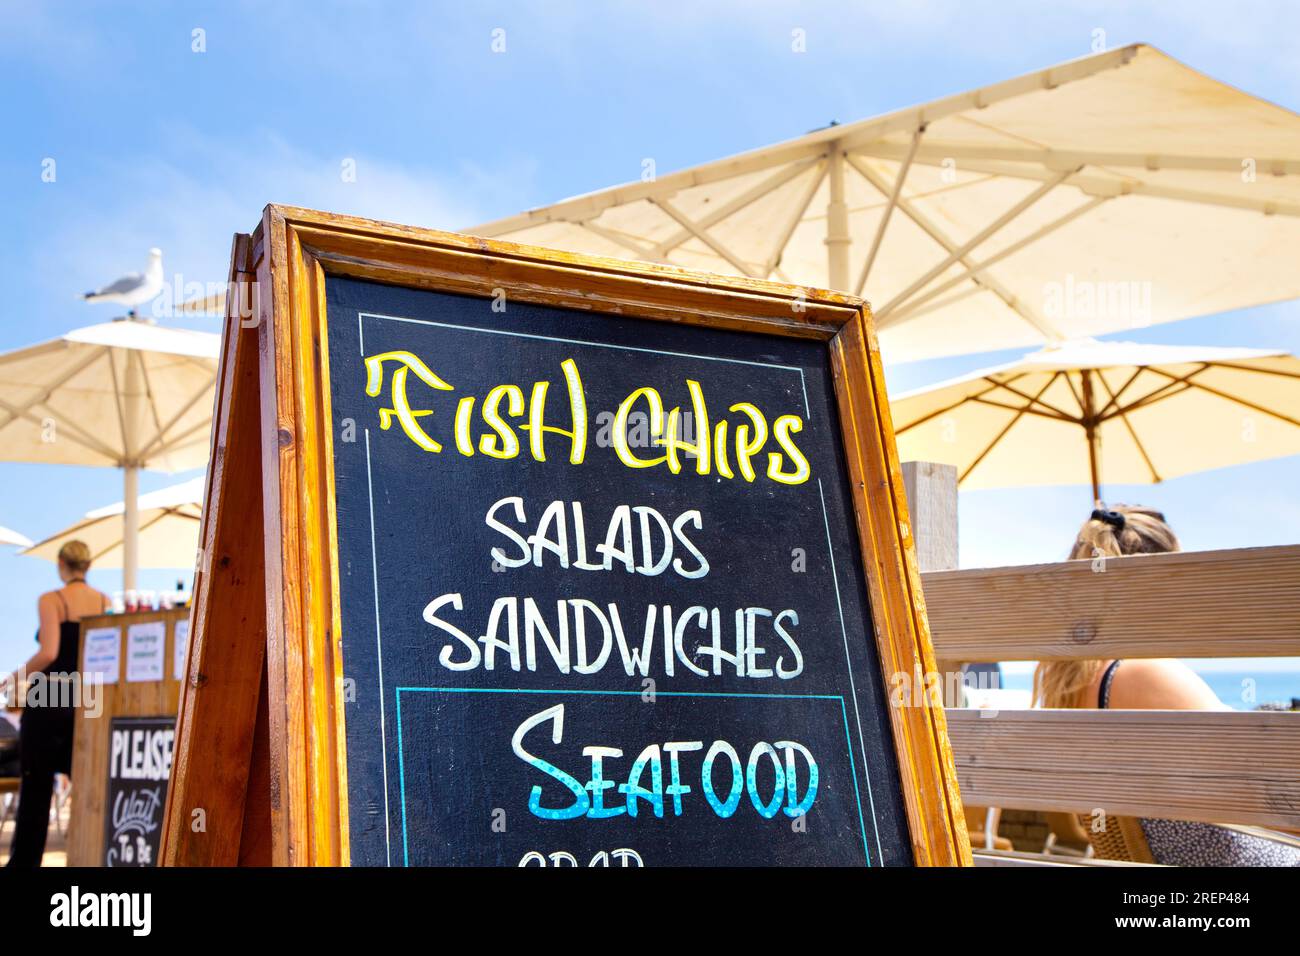 Restaurant sign for fish and chips and seafood along the seaside promenade in Brighton, England Stock Photo